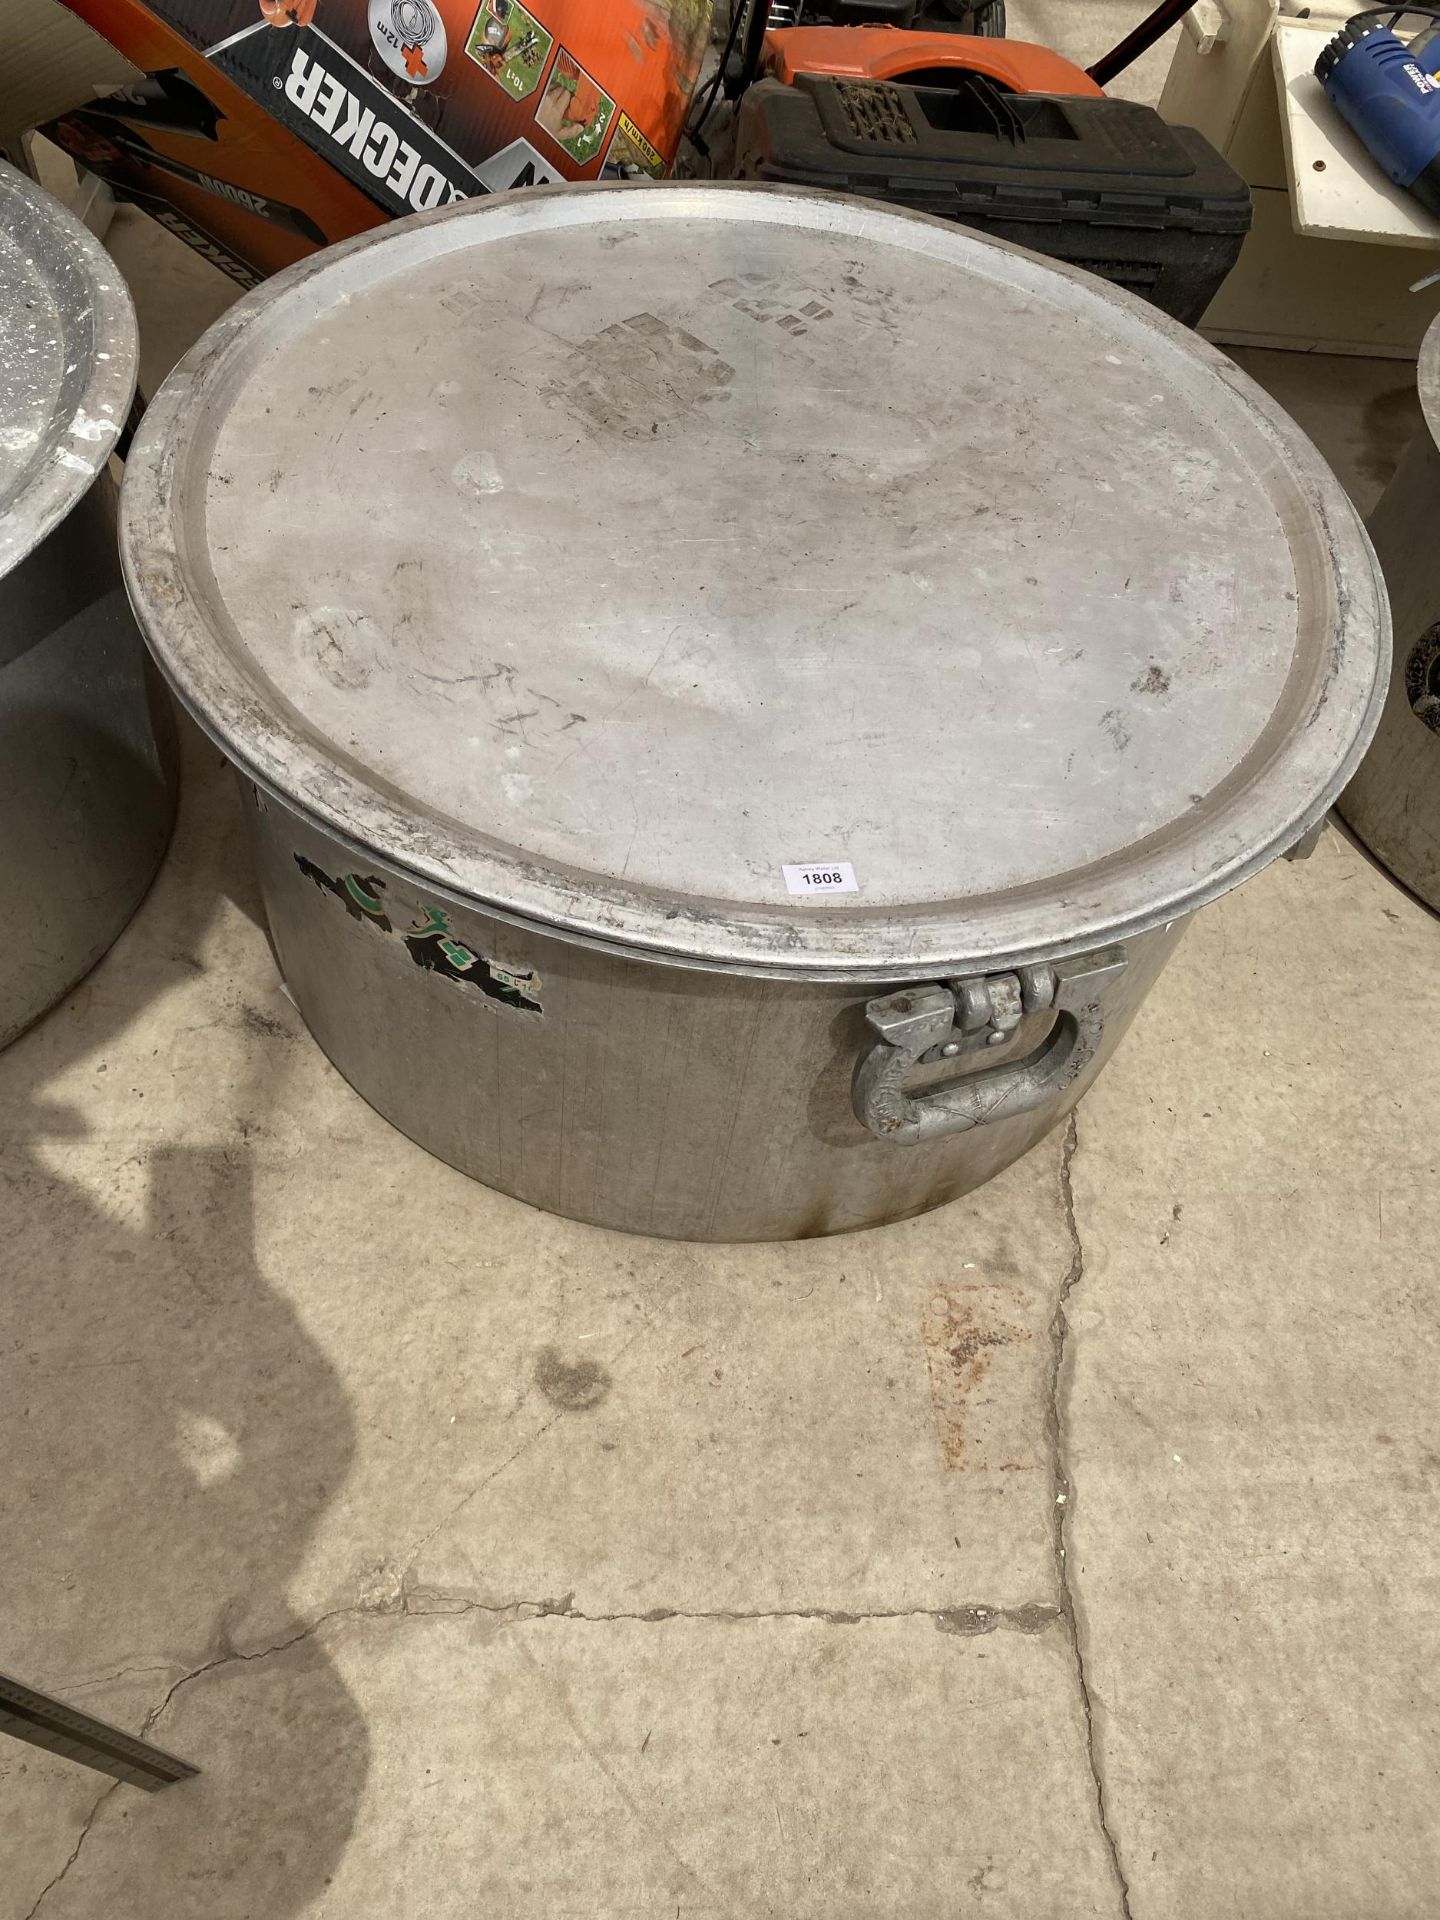 A VERY LARGE STAINLESS STEEL COOKING POT WITH LID